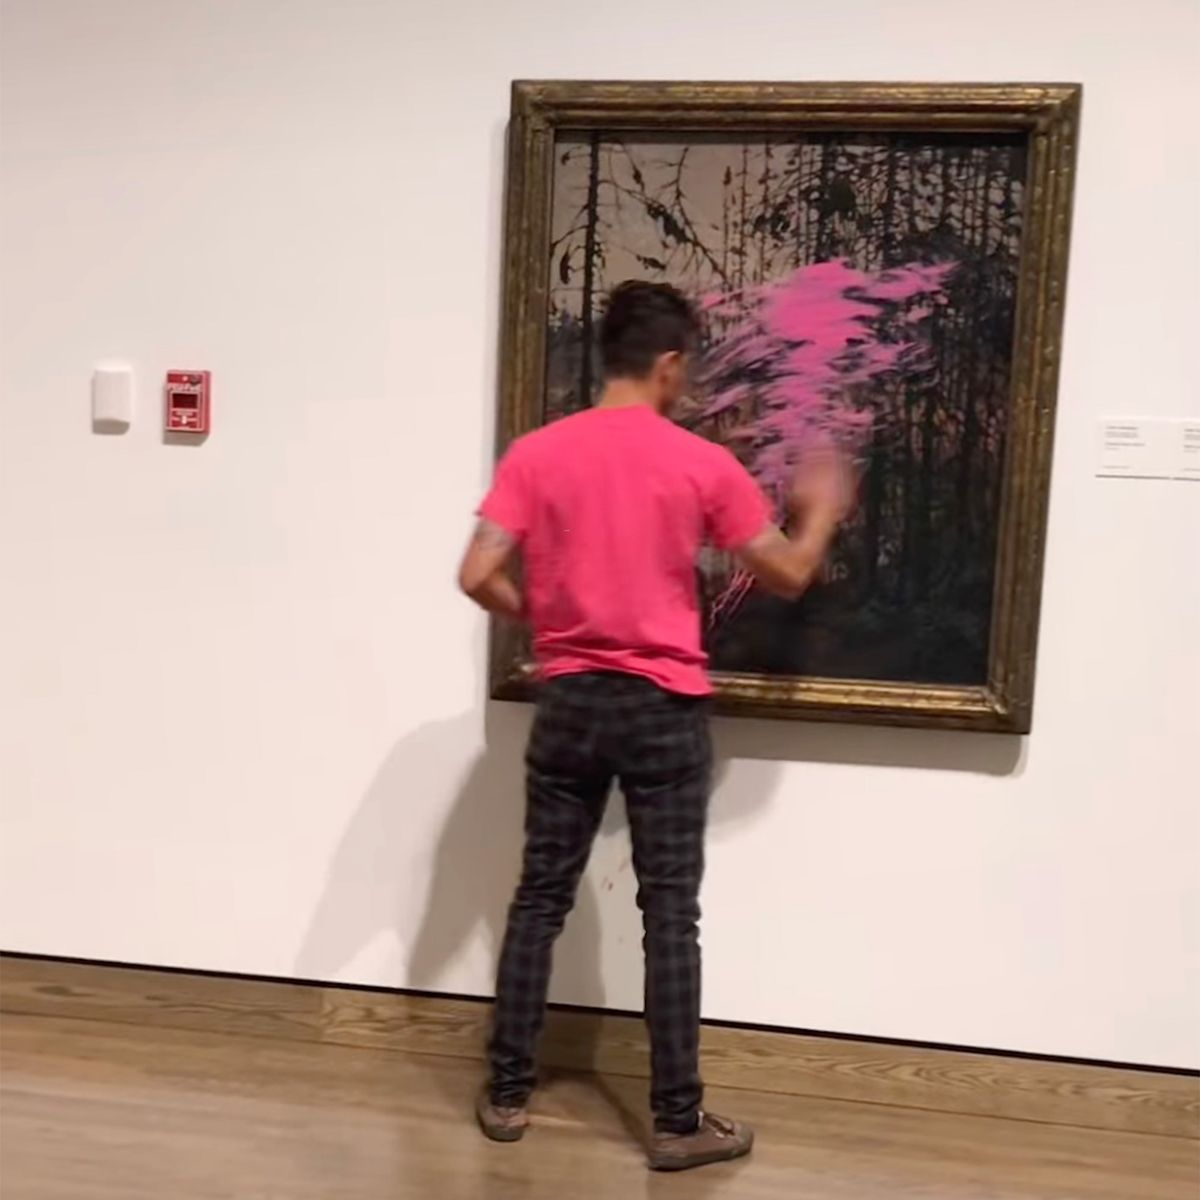 An activist with the group On2Ottawa spreads pink paint on the Tom Thomson painting Northern River (1915) at the National Gallery of Canada in Ottawa, Ontario Screenshot via On2Ottawa/Facebook